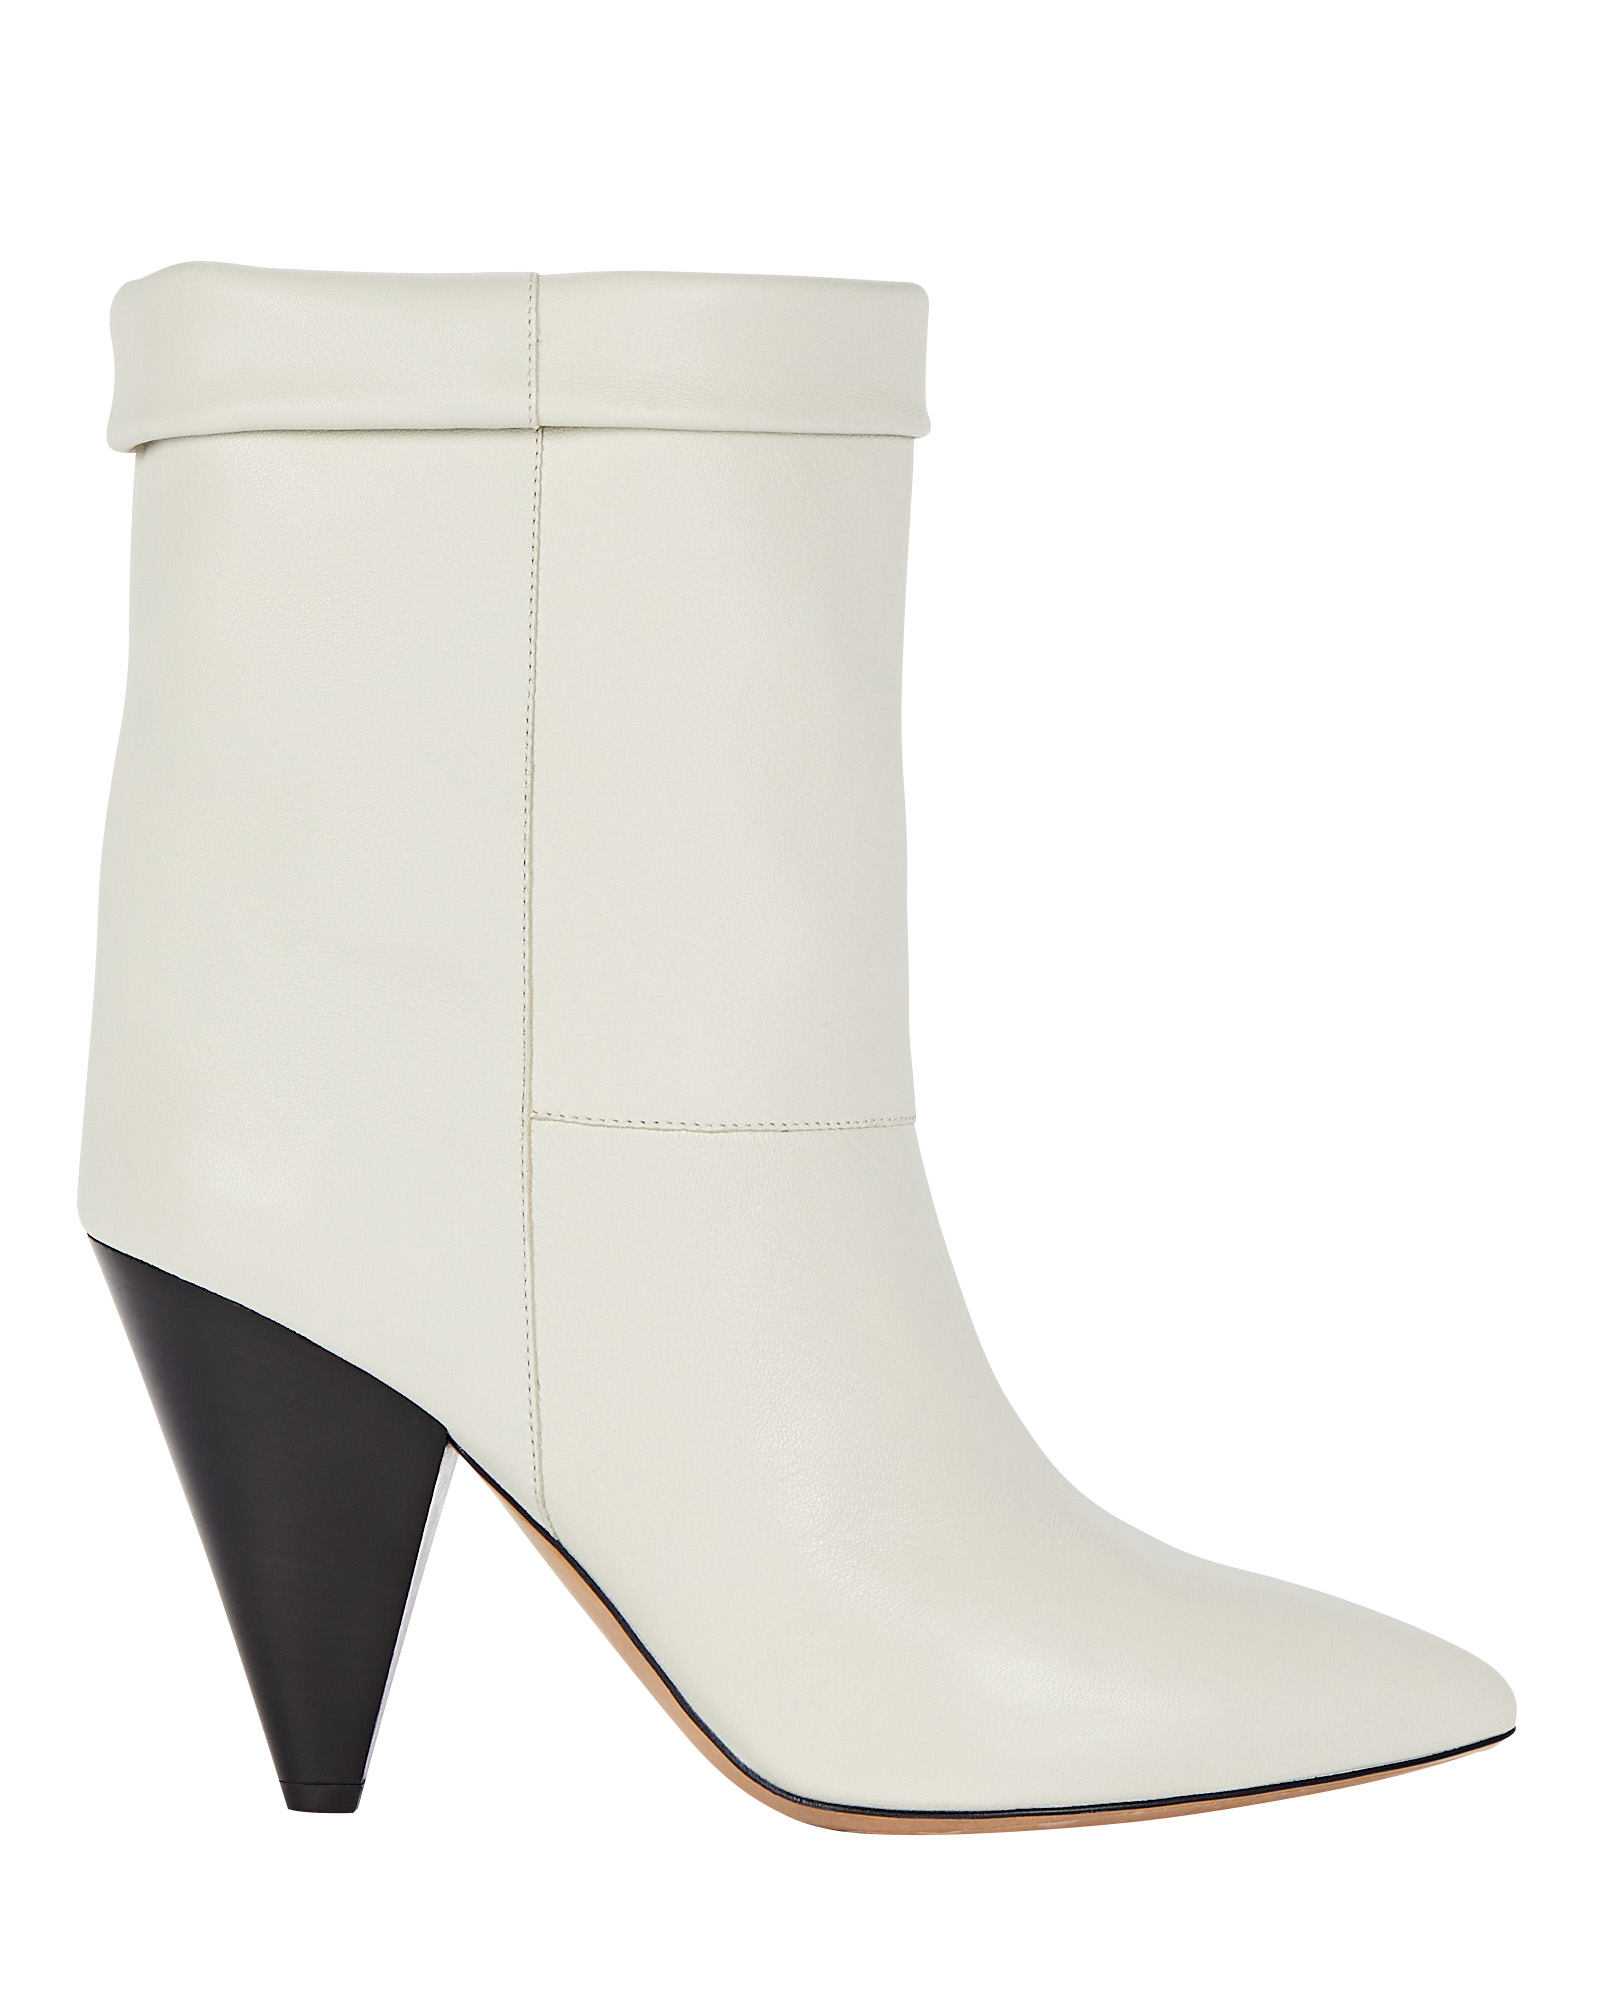 Isabel Marant Luido Leather Ankle Boots | INTERMIX®